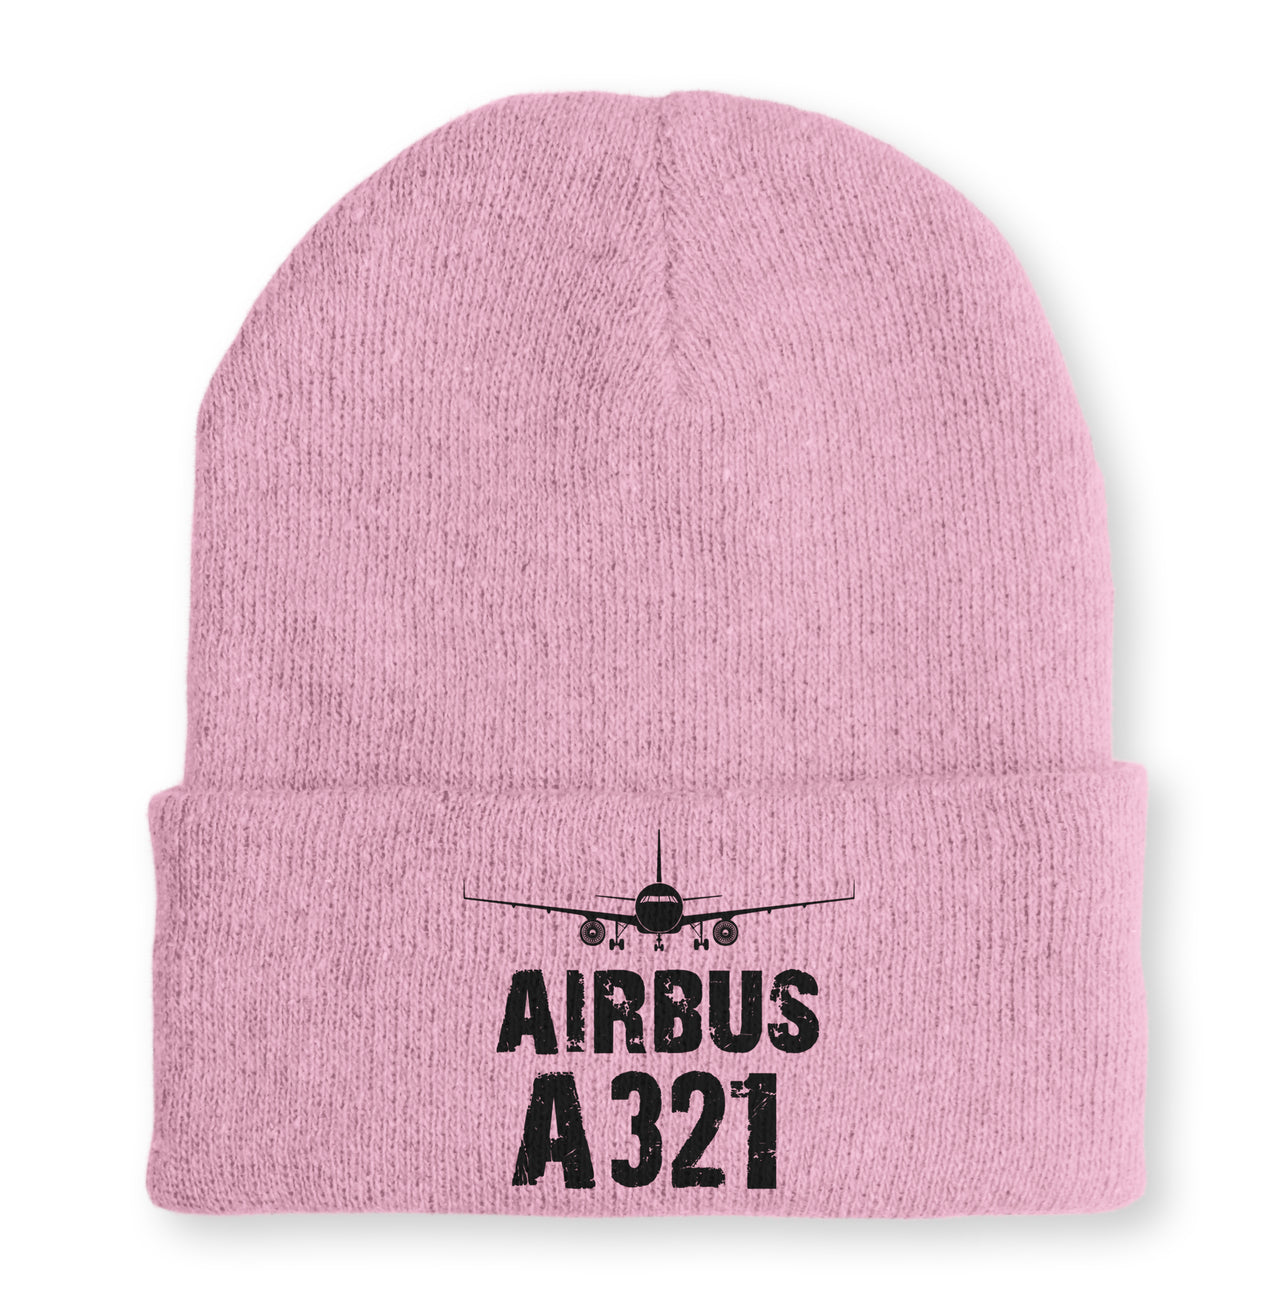 Airbus A321 & Plane Embroidered Beanies